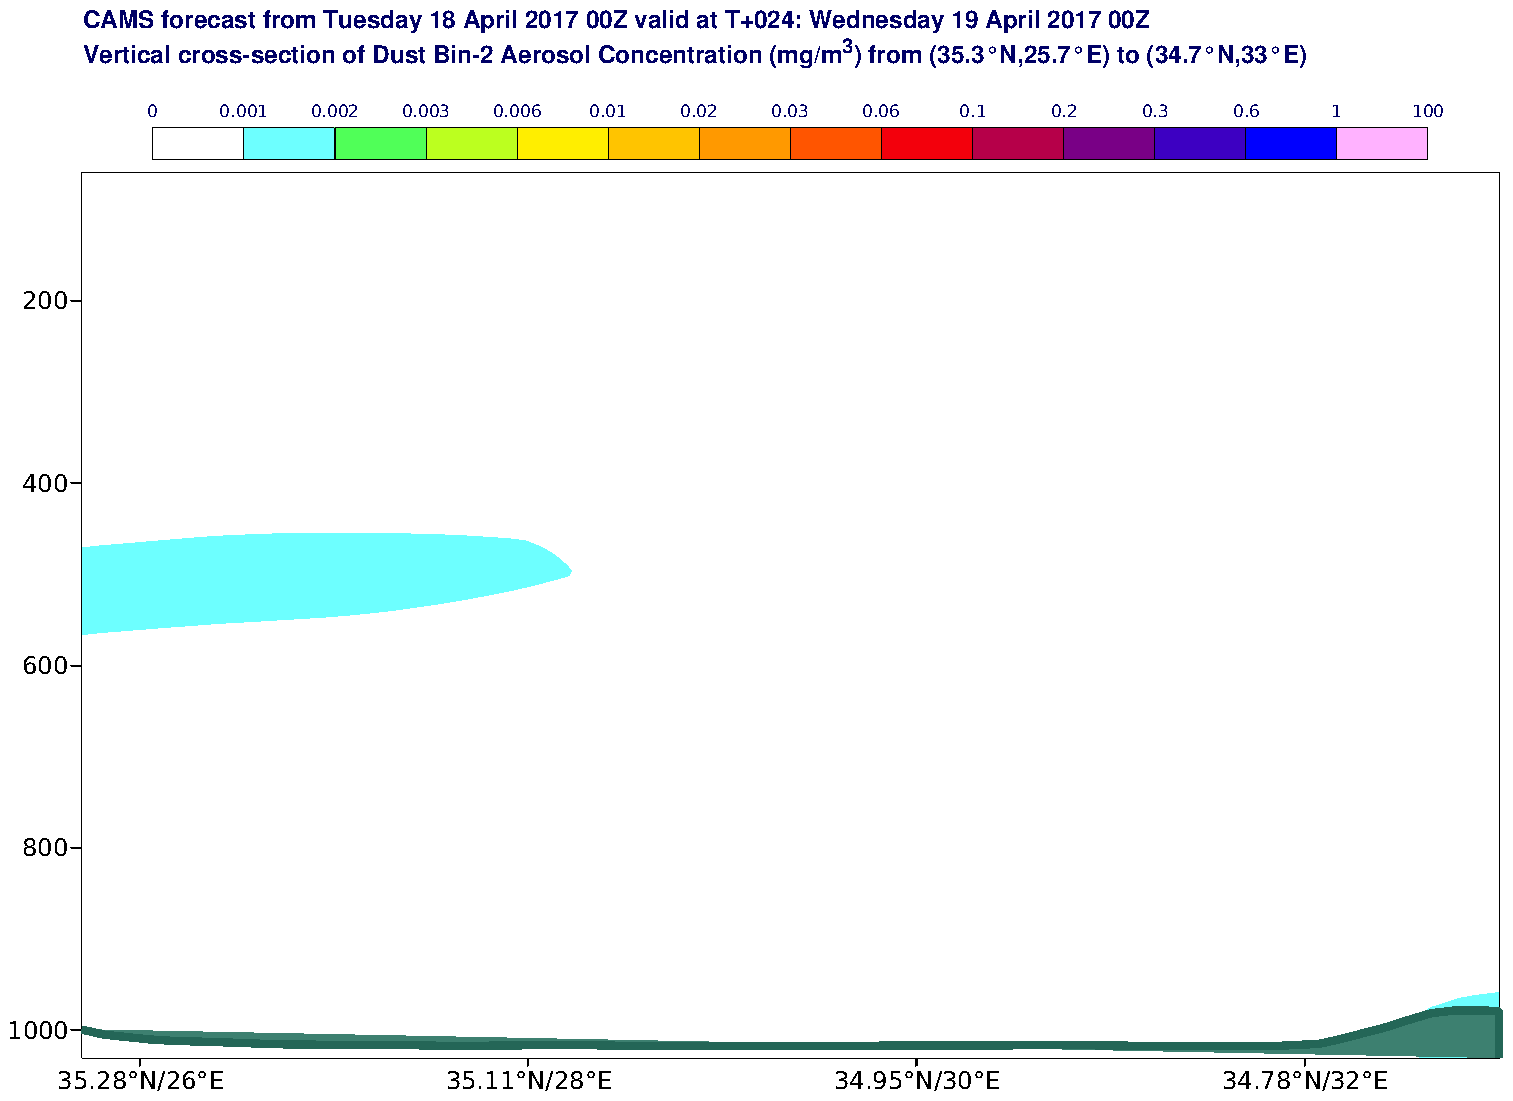 Vertical cross-section of Dust Bin-2 Aerosol Concentration (mg/m3) valid at T24 - 2017-04-19 00:00